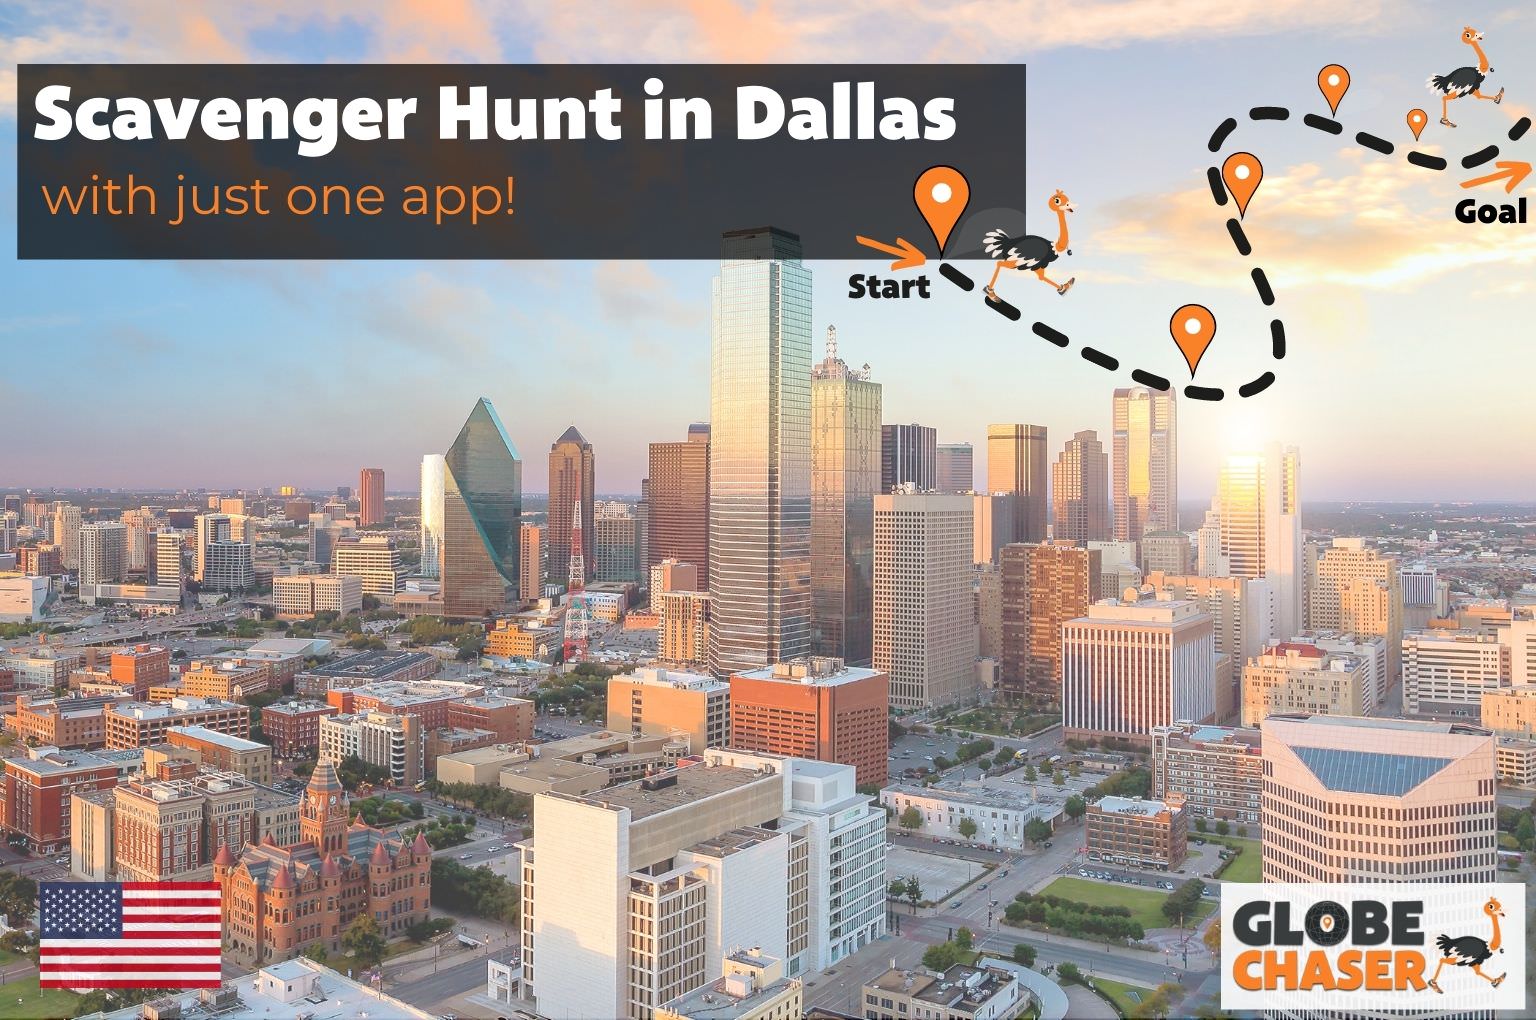 Scavenger Hunt in Dallas, USA - Family Activities with the Globe Chaser App for Outdoor Fun